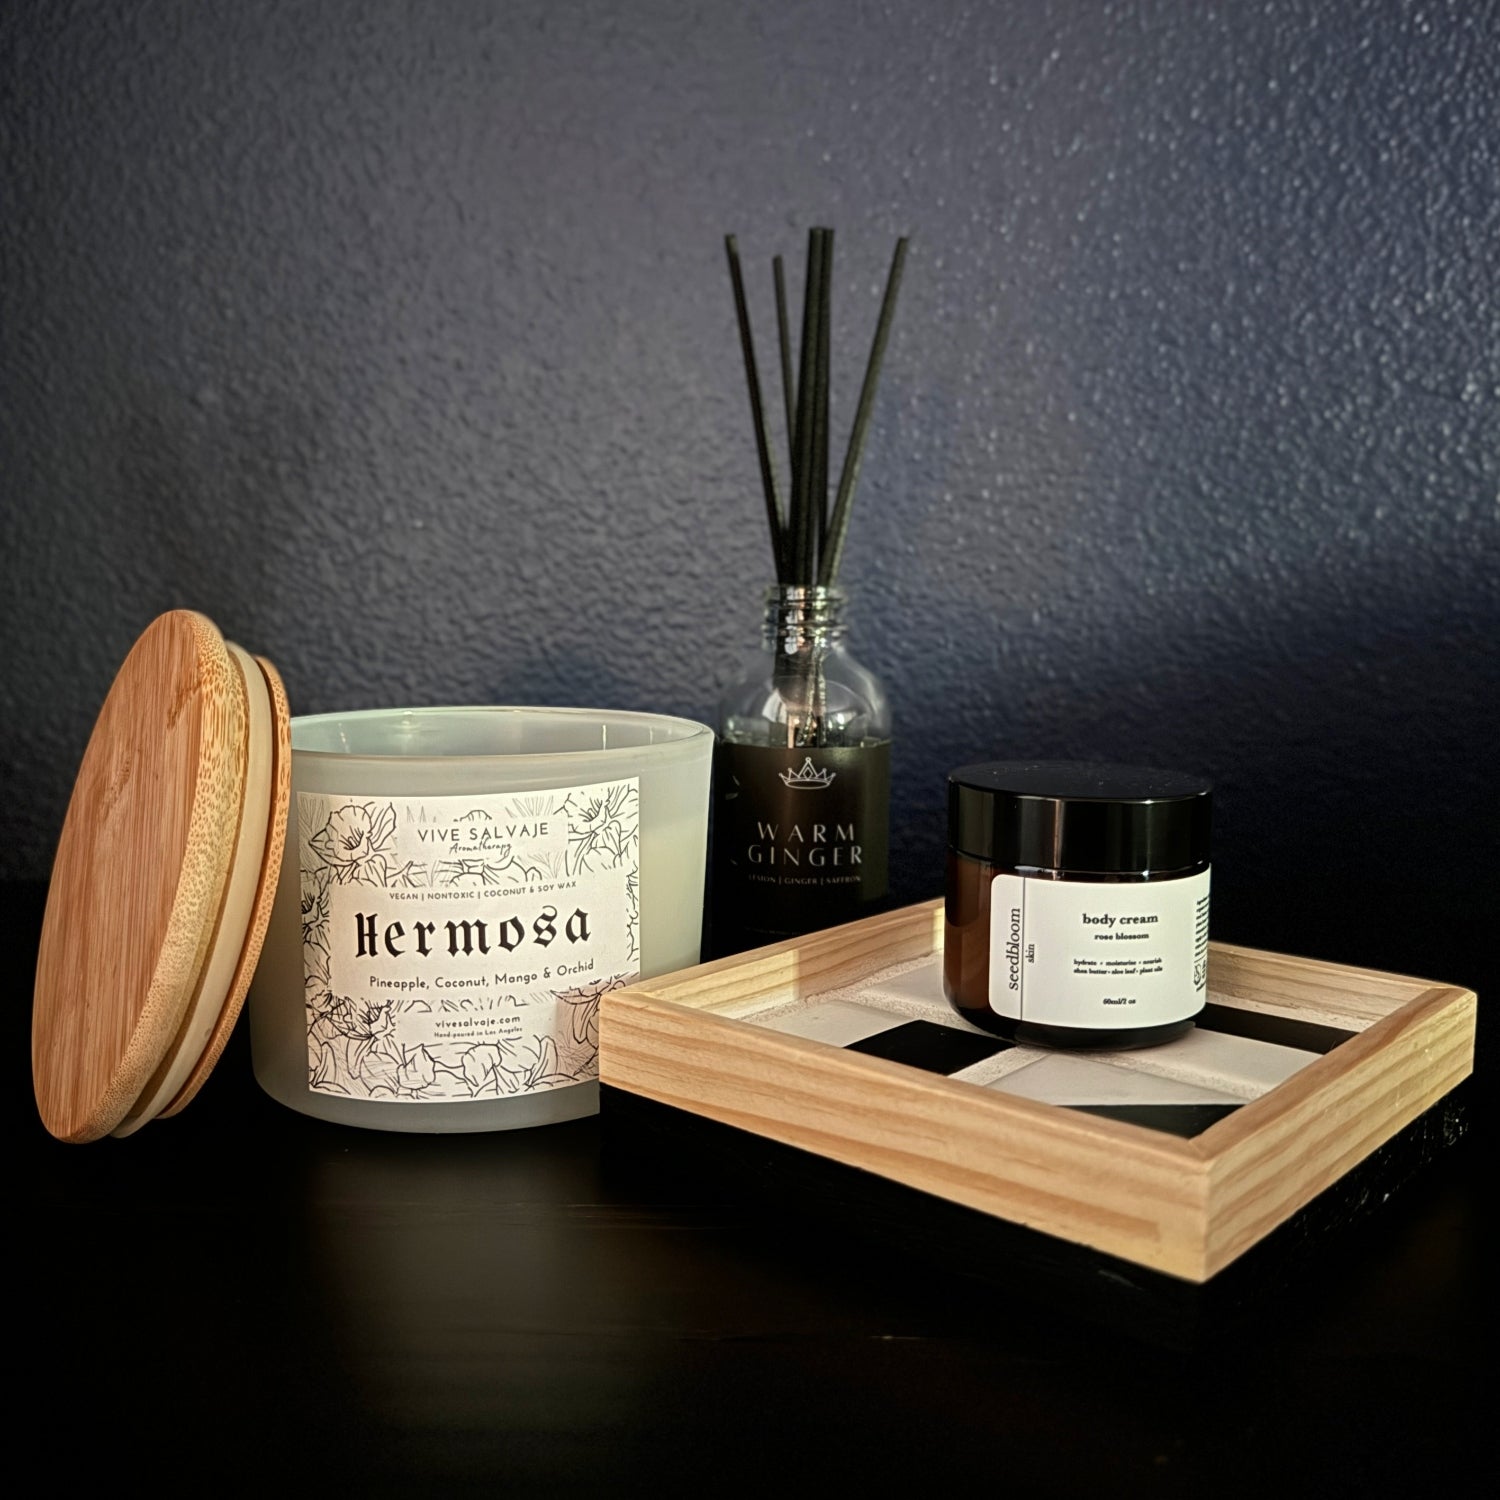 Collection of bedside aromatherapy items: three wick candle, warm ginger diffuser, rose blossom lotion, and a tile tray on a dark table with a blue background